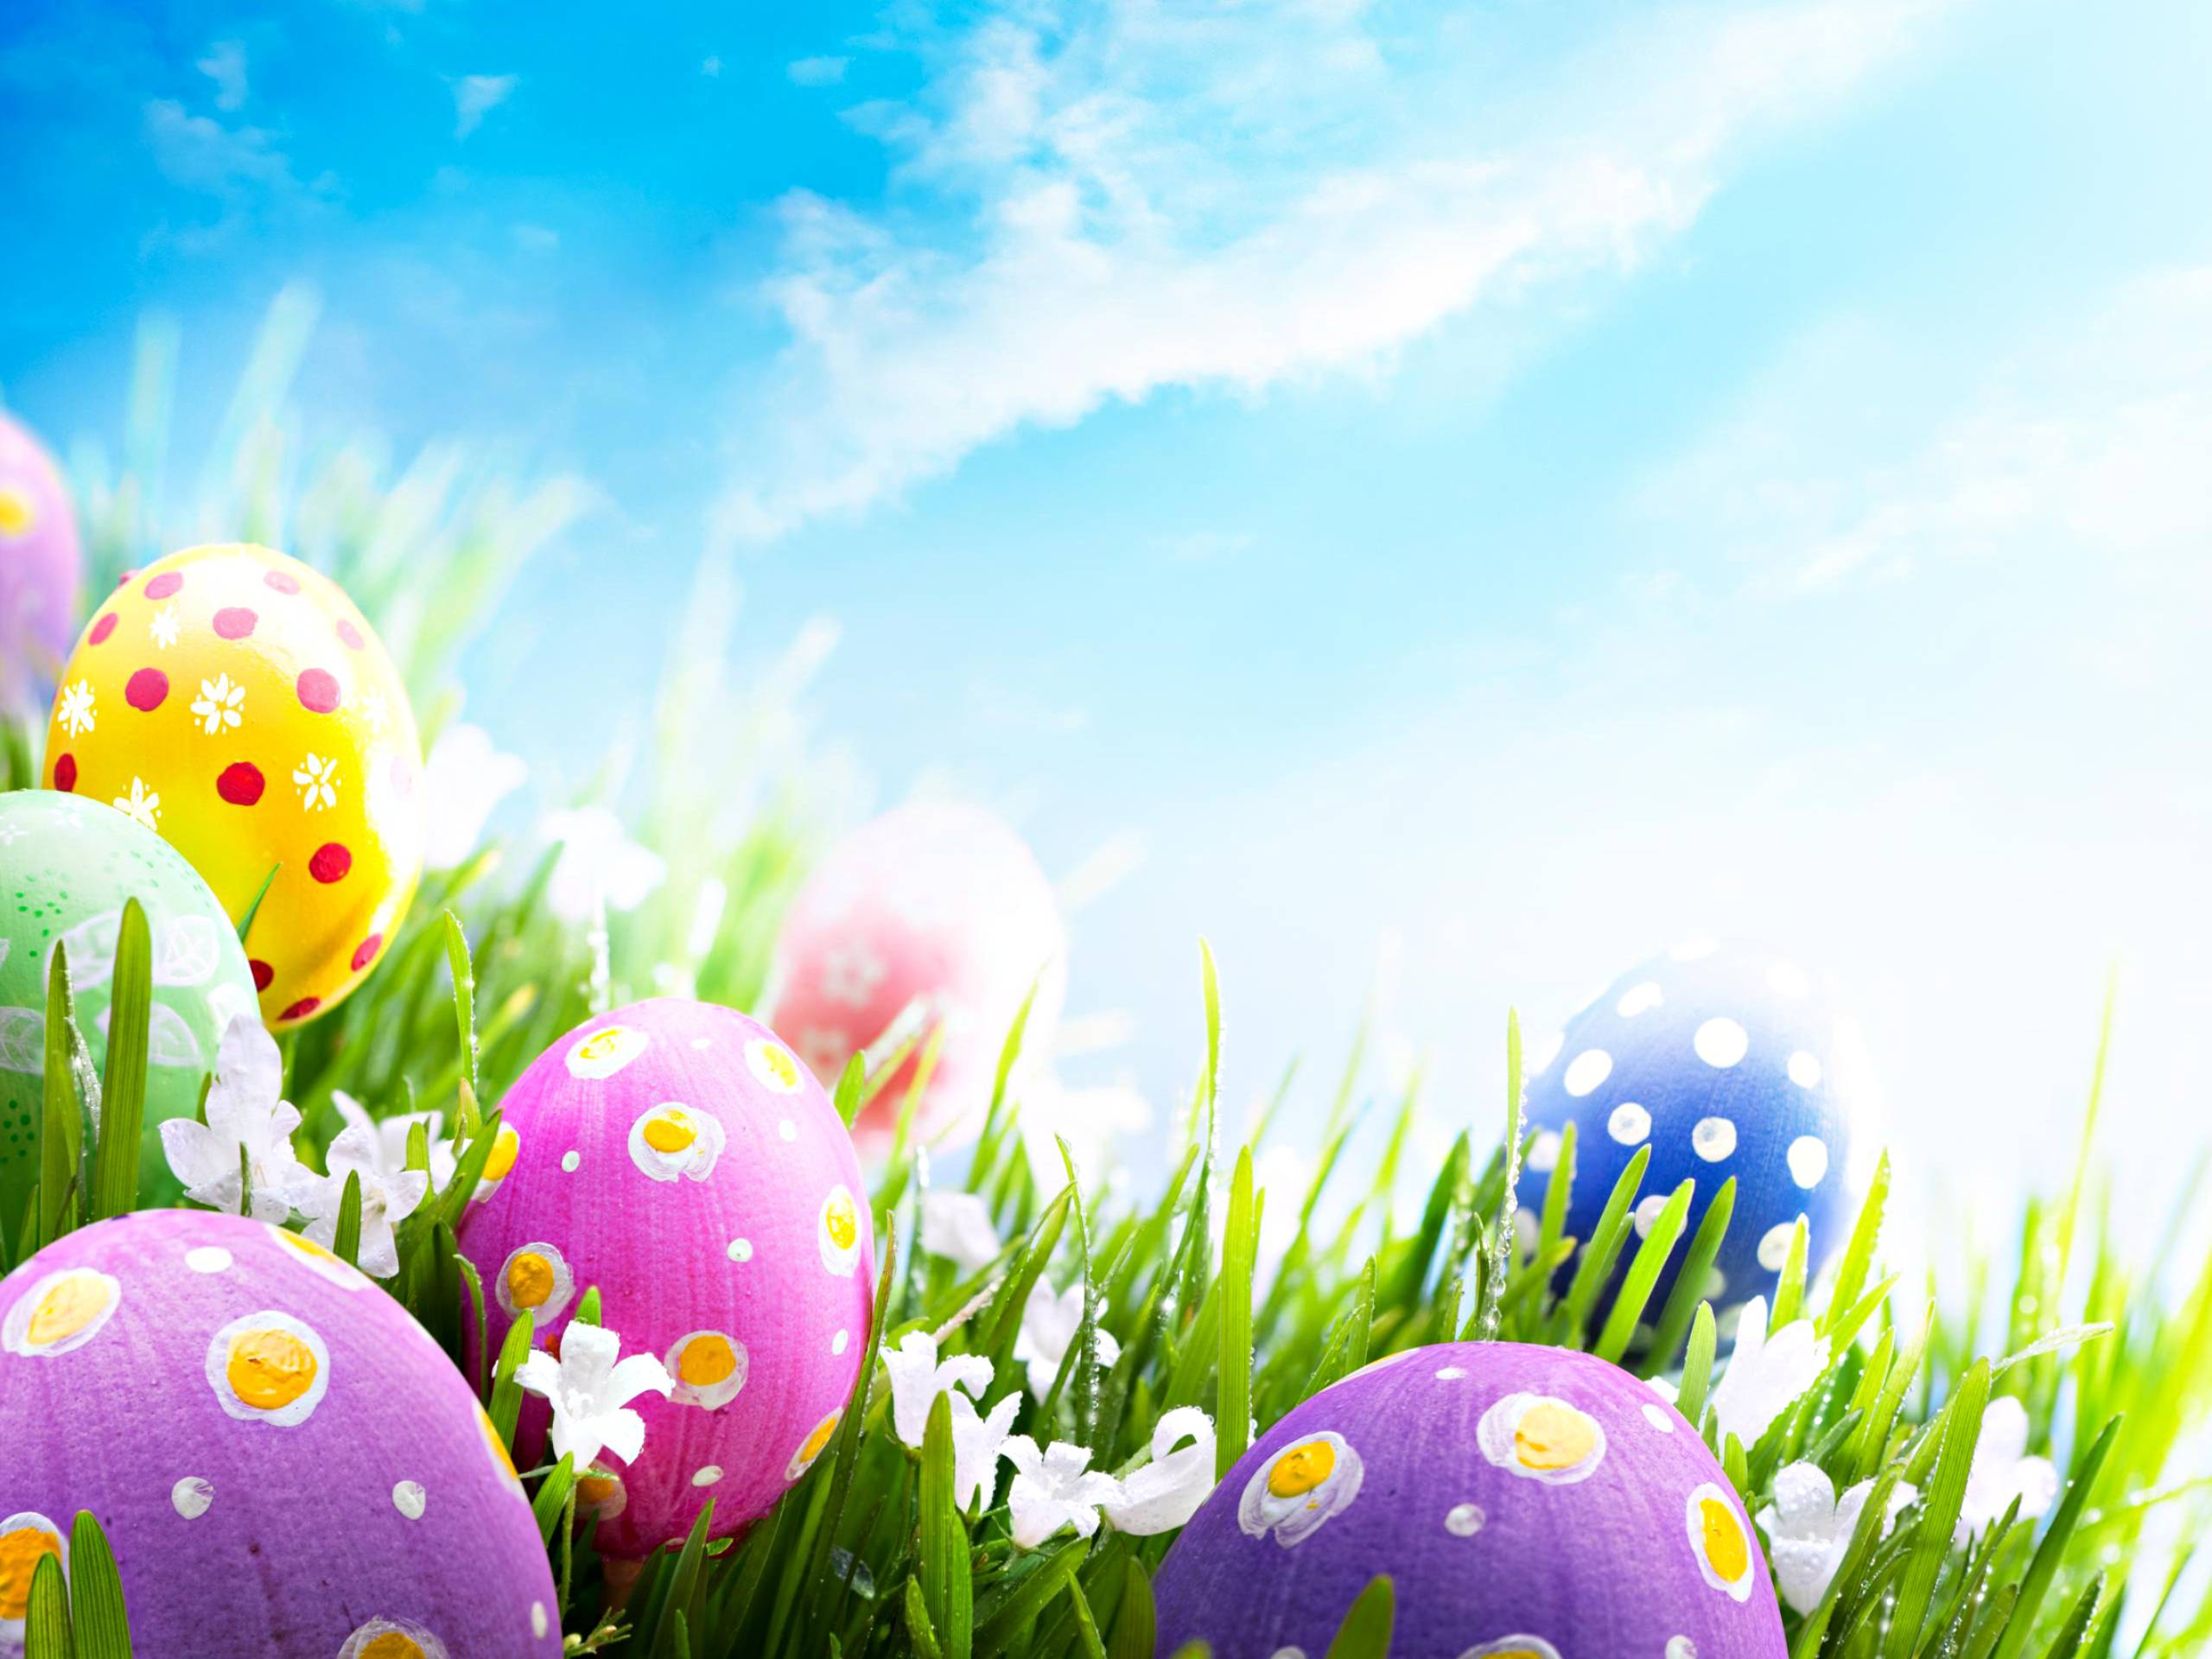 Free Happy Easter Wallpapers - Wallpaper Cave